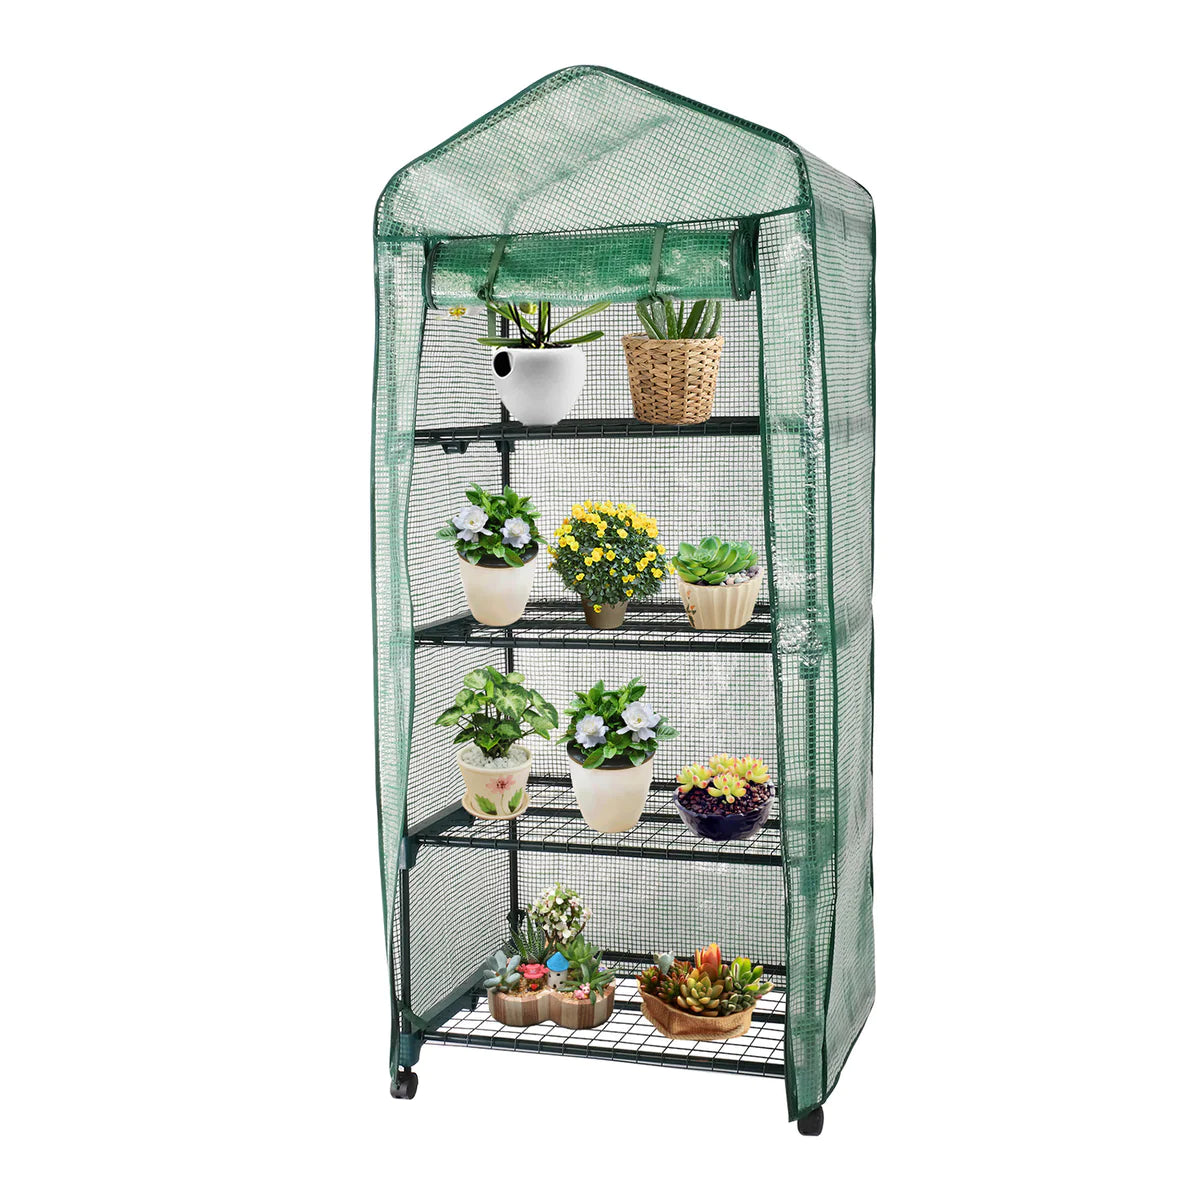 Small Greenhouse Metal Shelf with Cover Pot Available